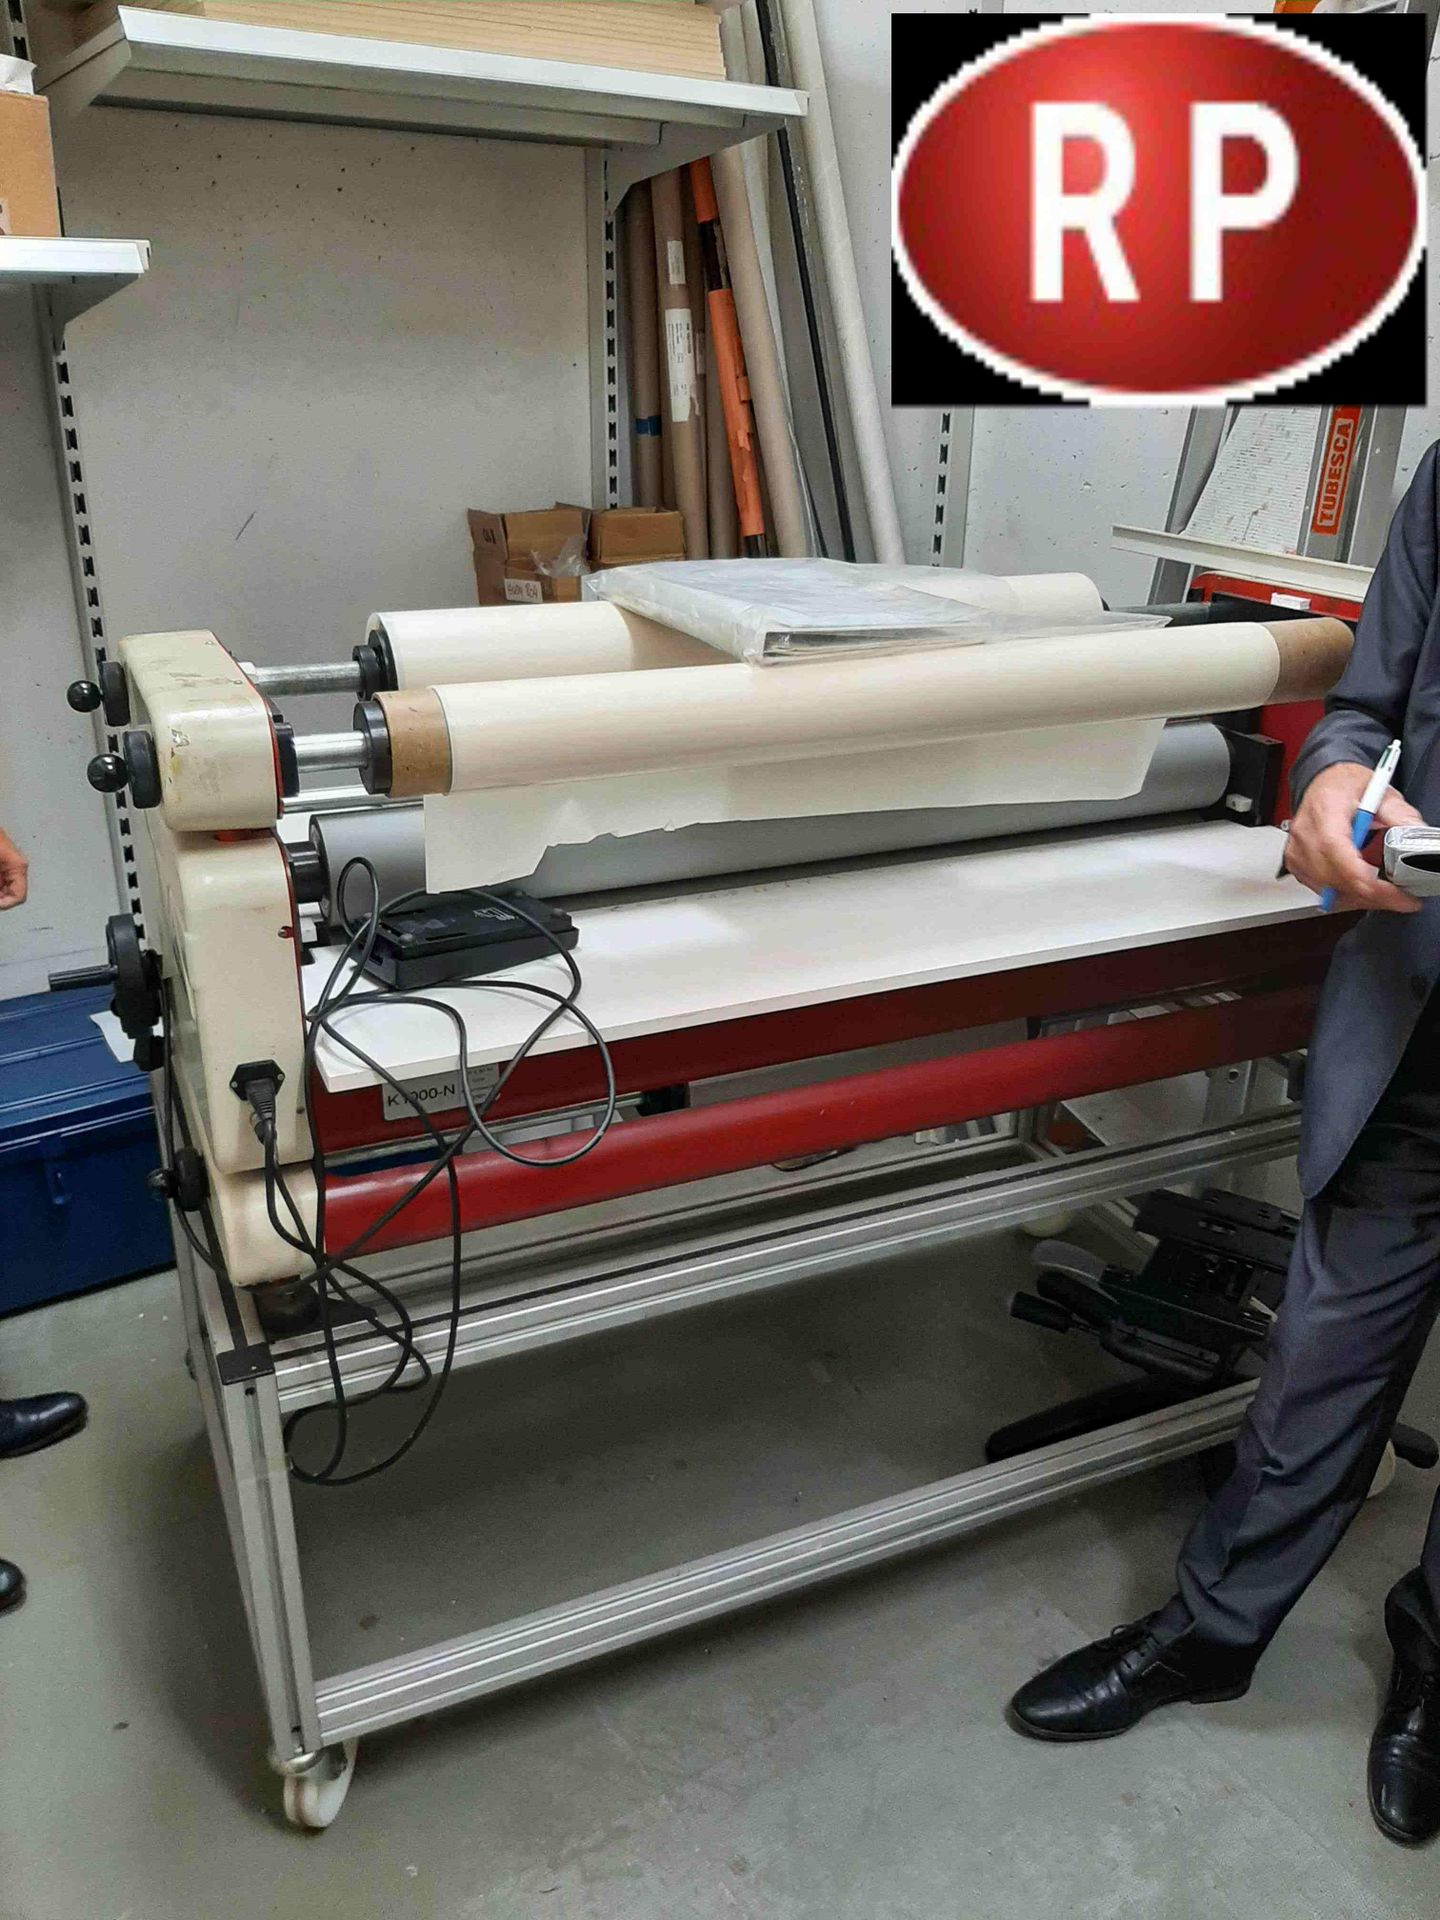 RP] Cold laminator brand NESCHEN, model K1000-N, year 1996, + roll Dimensions 150 cm x 83 cm 120 cm. Used condition. Reserved for professionals, no certificate of conformity. Issuing department :